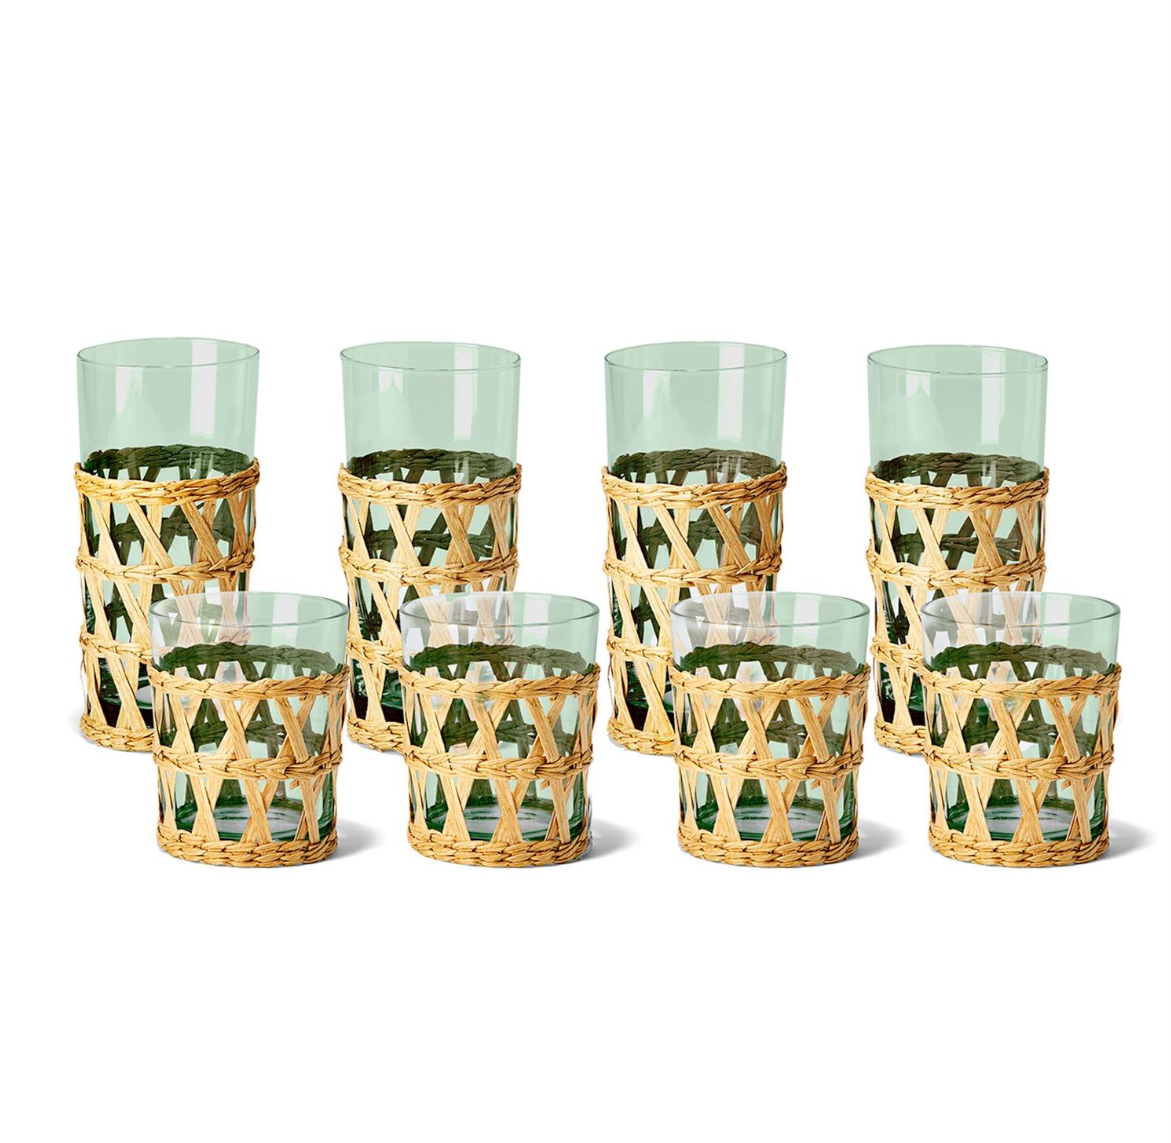 Countryside Chic 24 Pc Hand-Woven Lattice Drinking Glass